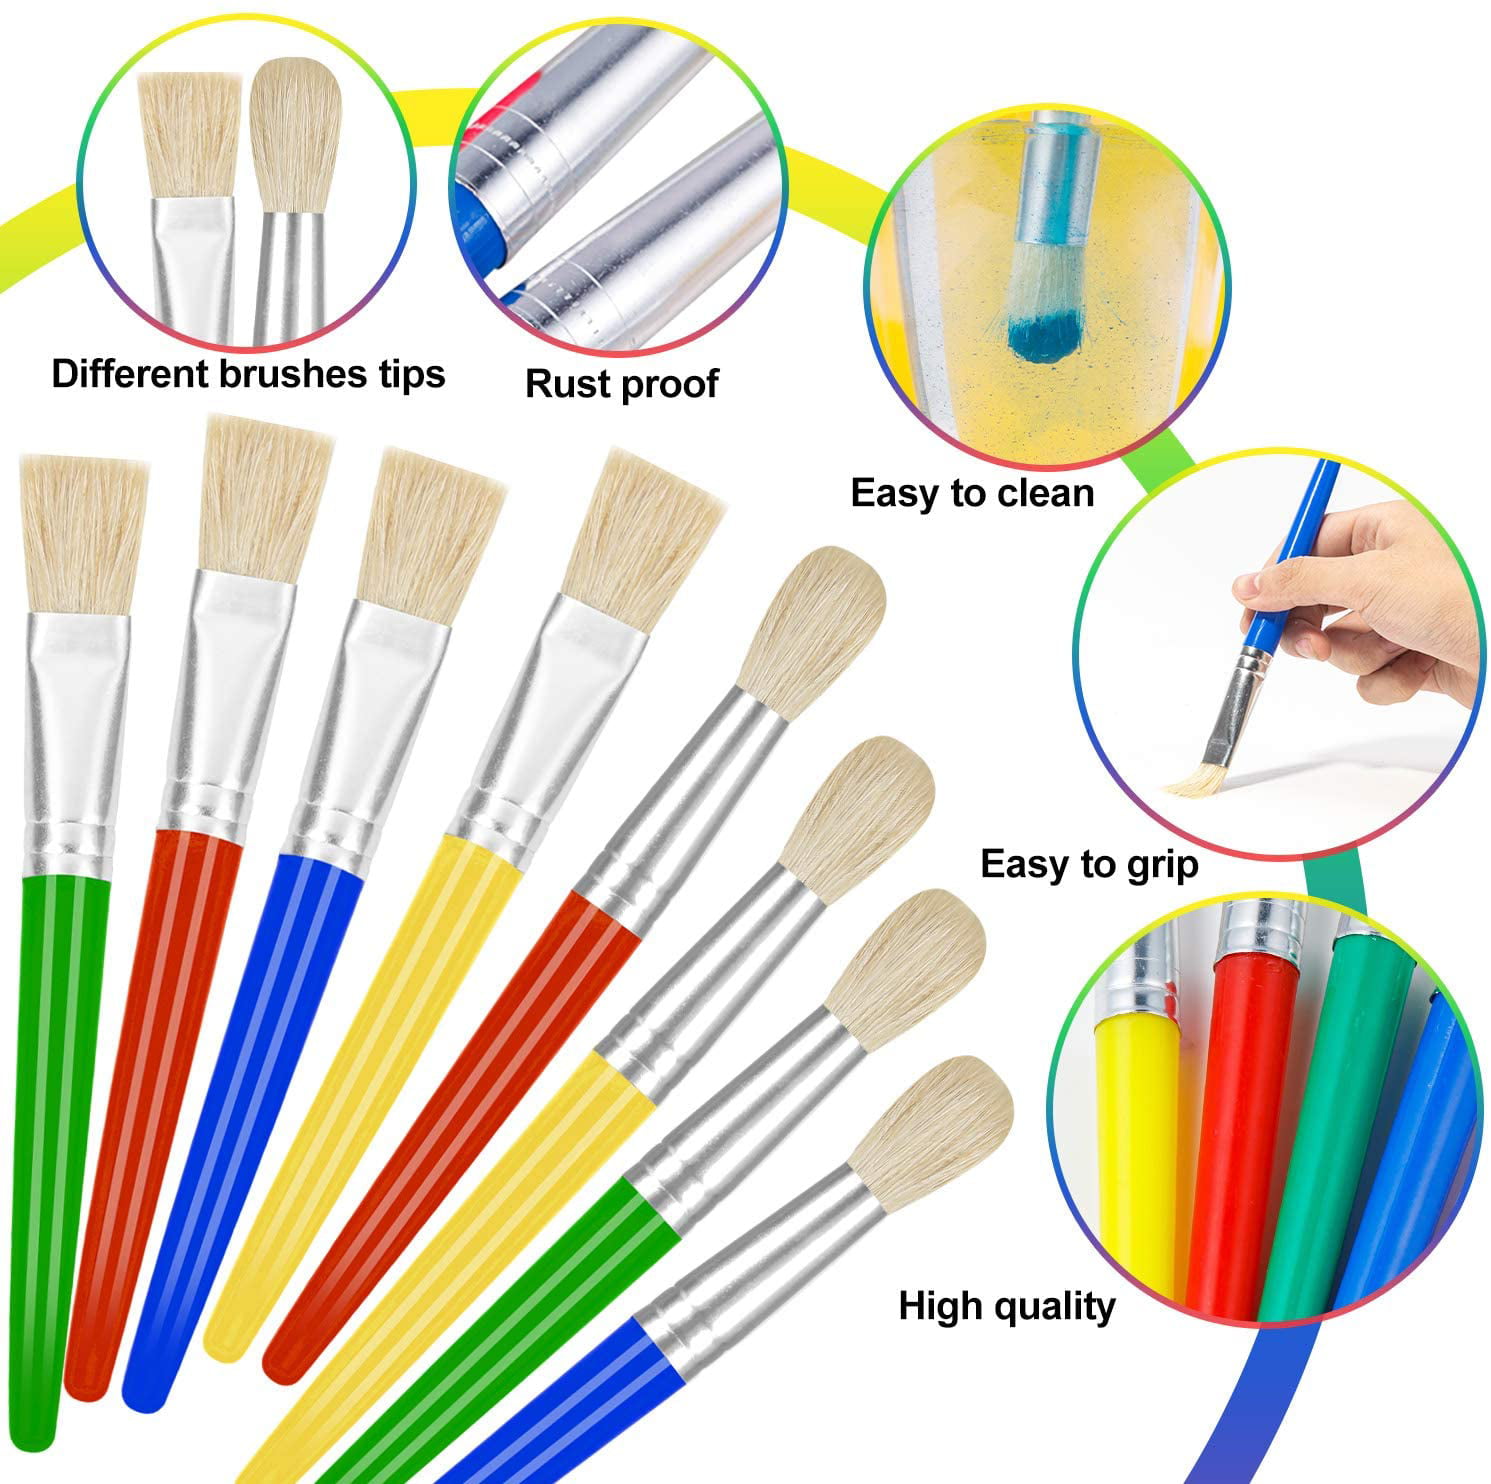 JCF Kids Paint Brushes with Plastic Handle and Hog Bristles 4 PCS Flat Tip Painting Brushes for children Multi Color Paint Brushes-7.4 Inch